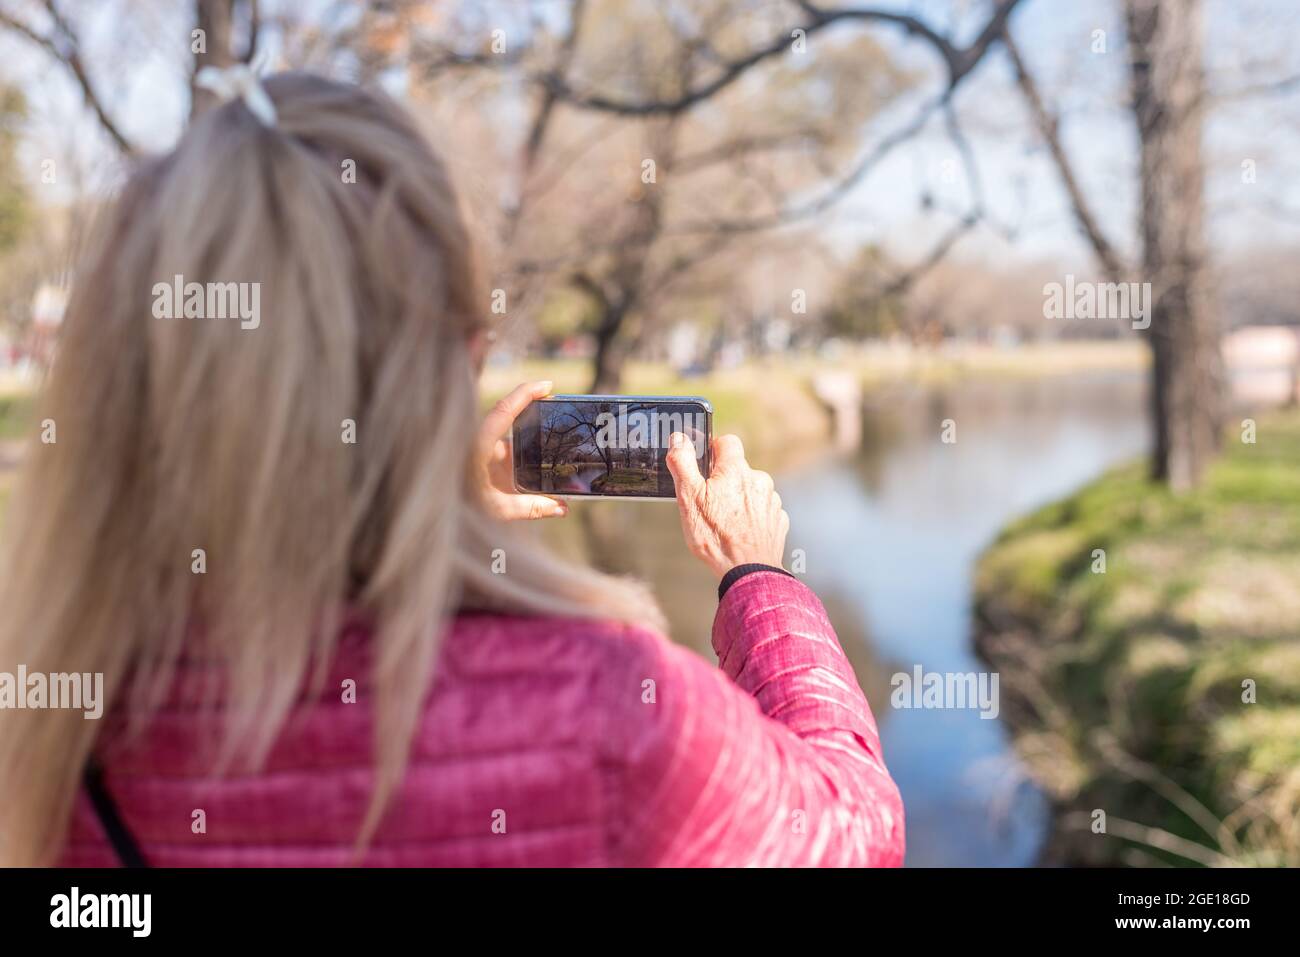 Rear view of an adult woman taking a picture of the park with her phone in a sunny day. Stock Photo